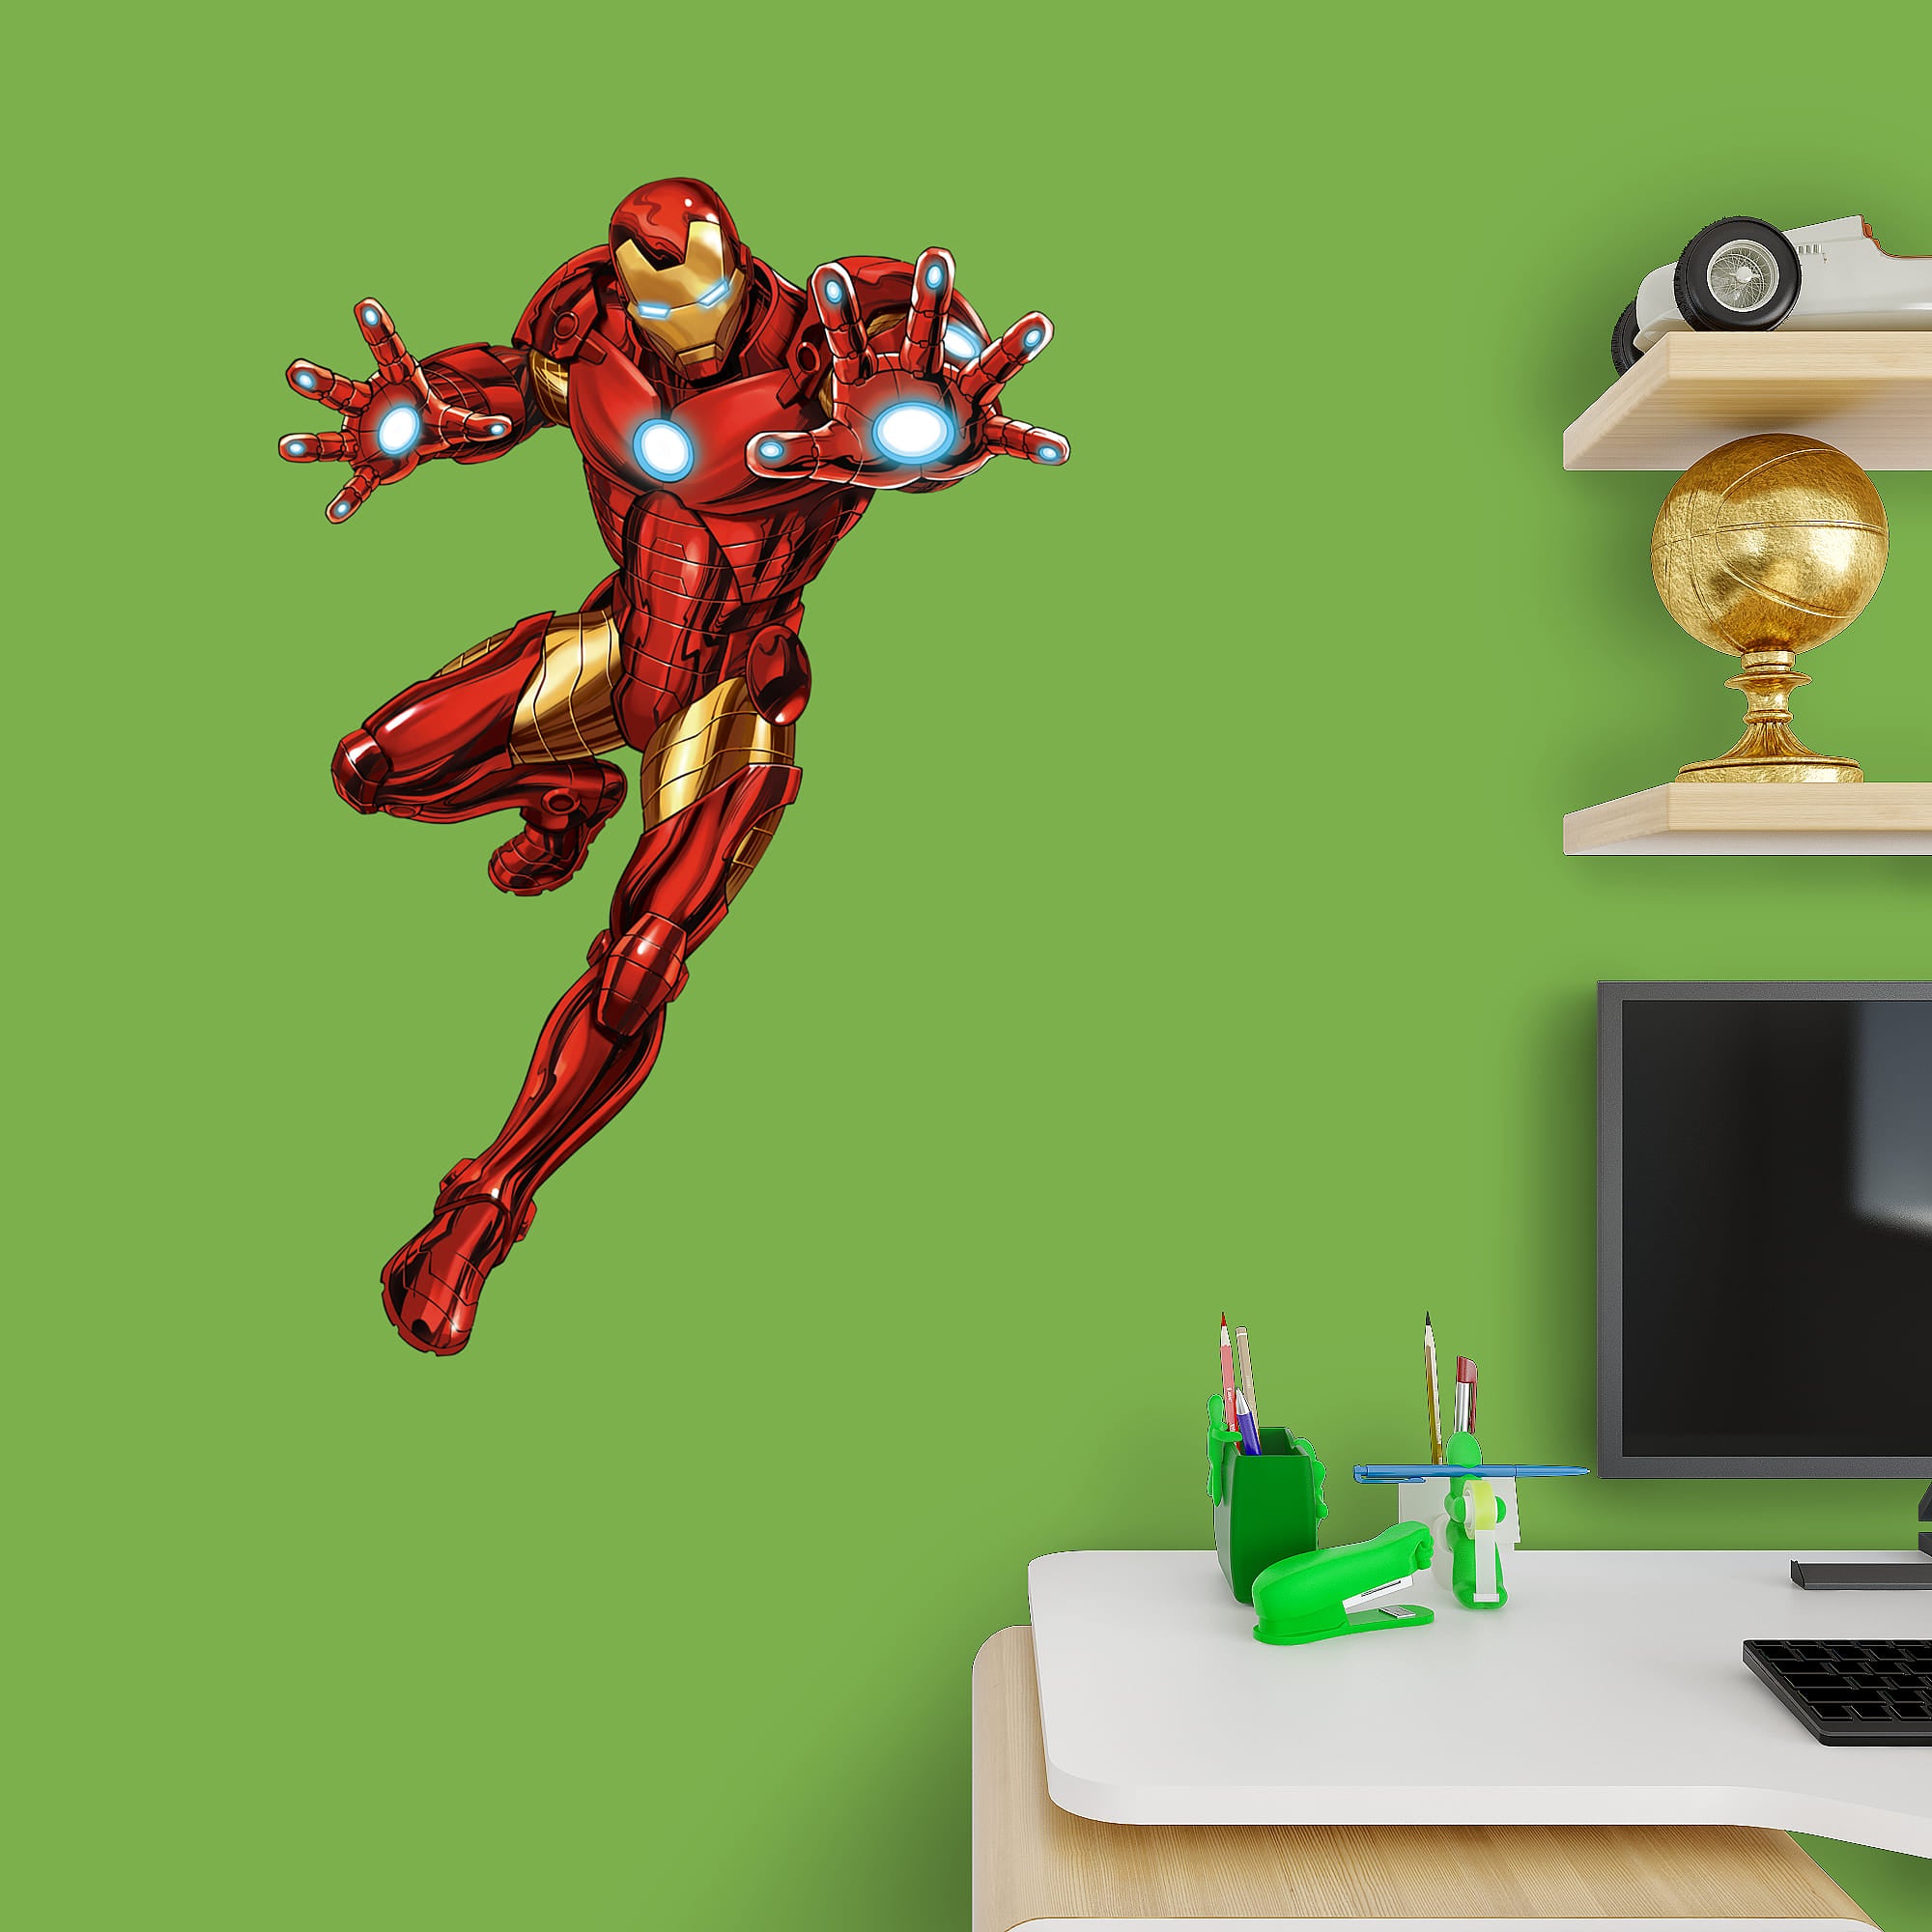 Iron Man - Officially Licensed Removable Wall Decal 24.0"W x 36.0"H by Fathead | Vinyl